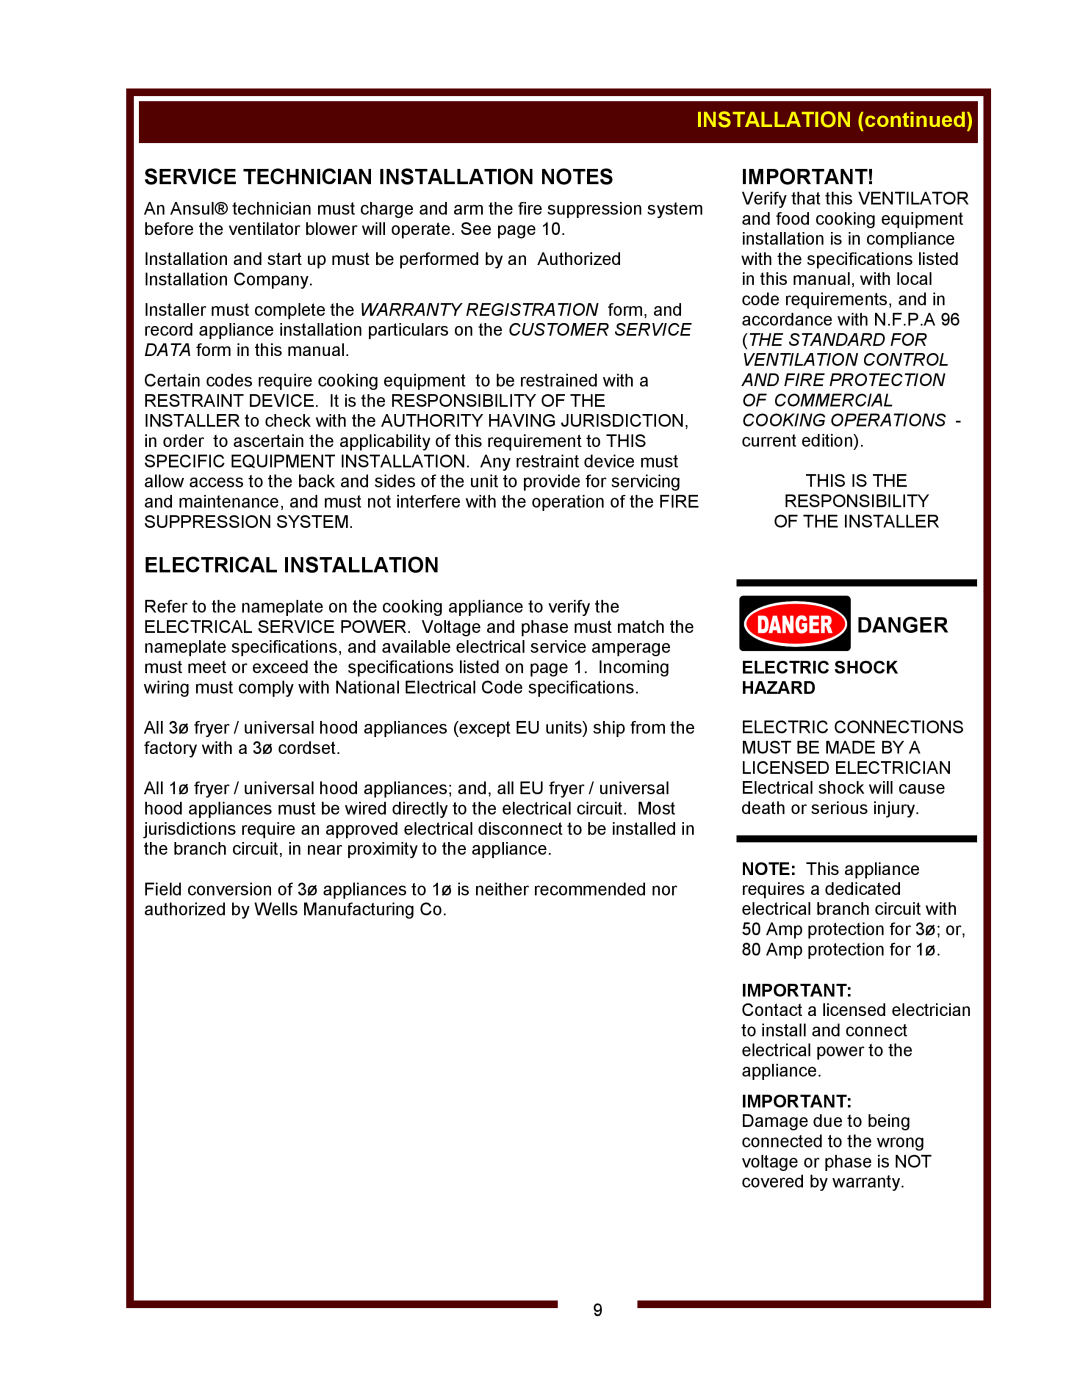 Wells WVF-886 INSTALLATION continued, Service Technician Installation Notes, Electrical Installation, Danger 